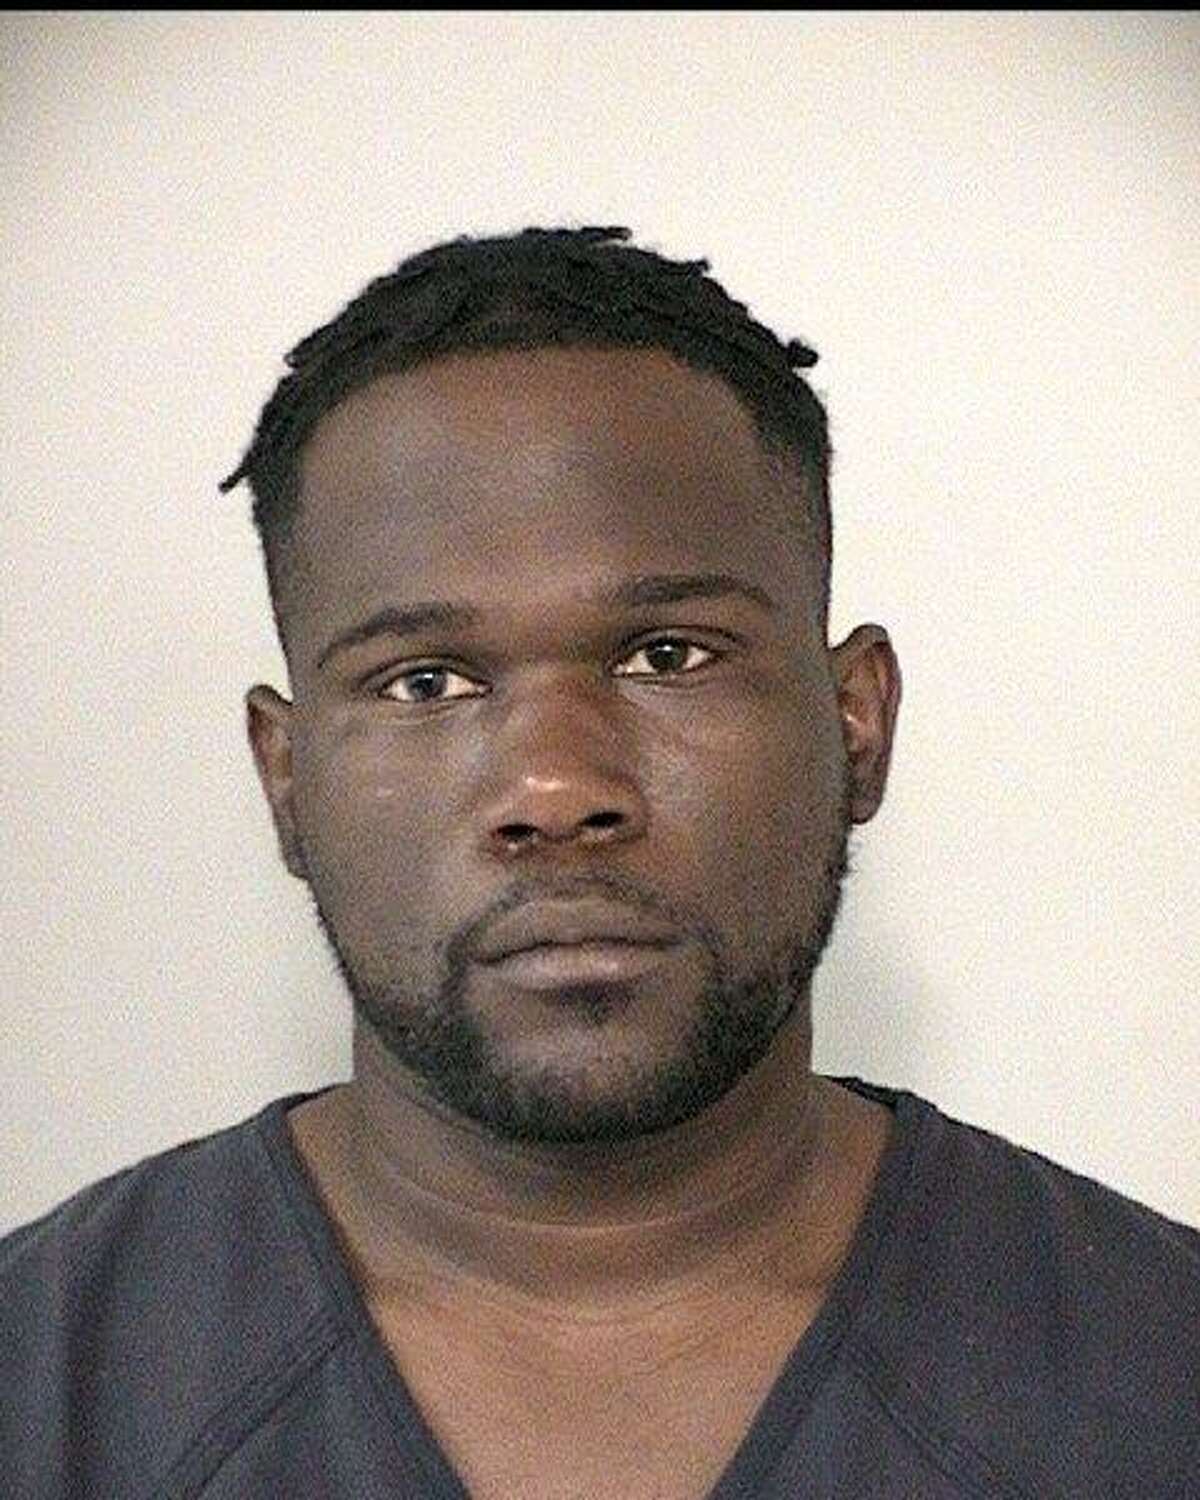 Johnny Ray Rodgers, 29, was arrested about 11 a.m. Wednesday, Oct. 20, 2021, by members of the Fort Bend Sheriff’s and members of the Gulf Coast Violent Offenders Task Force. Rodgers is connected to a Robbery that occurred in the Mission Bend subdivision in Fort Bend County.